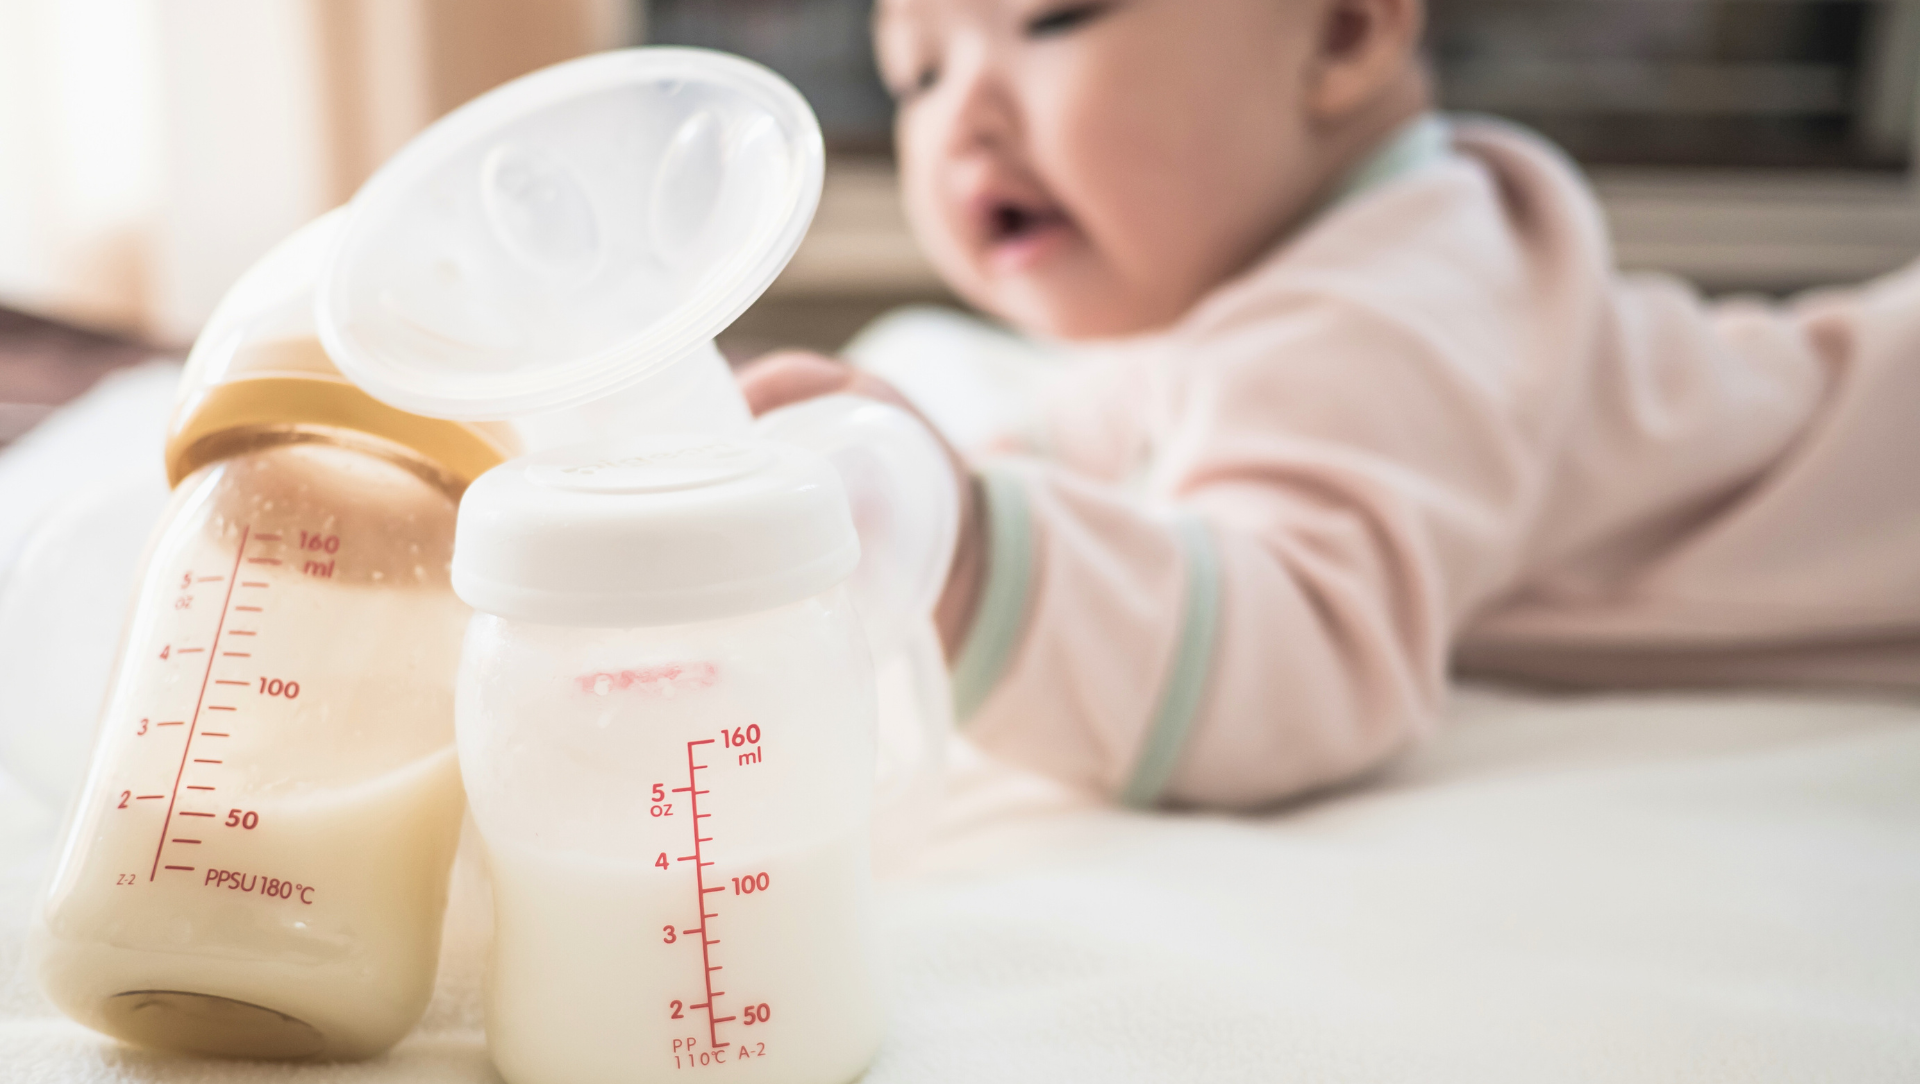 10 Essential Tips for Boosting Milk Supply: A Guide for Breastfeeding Moms